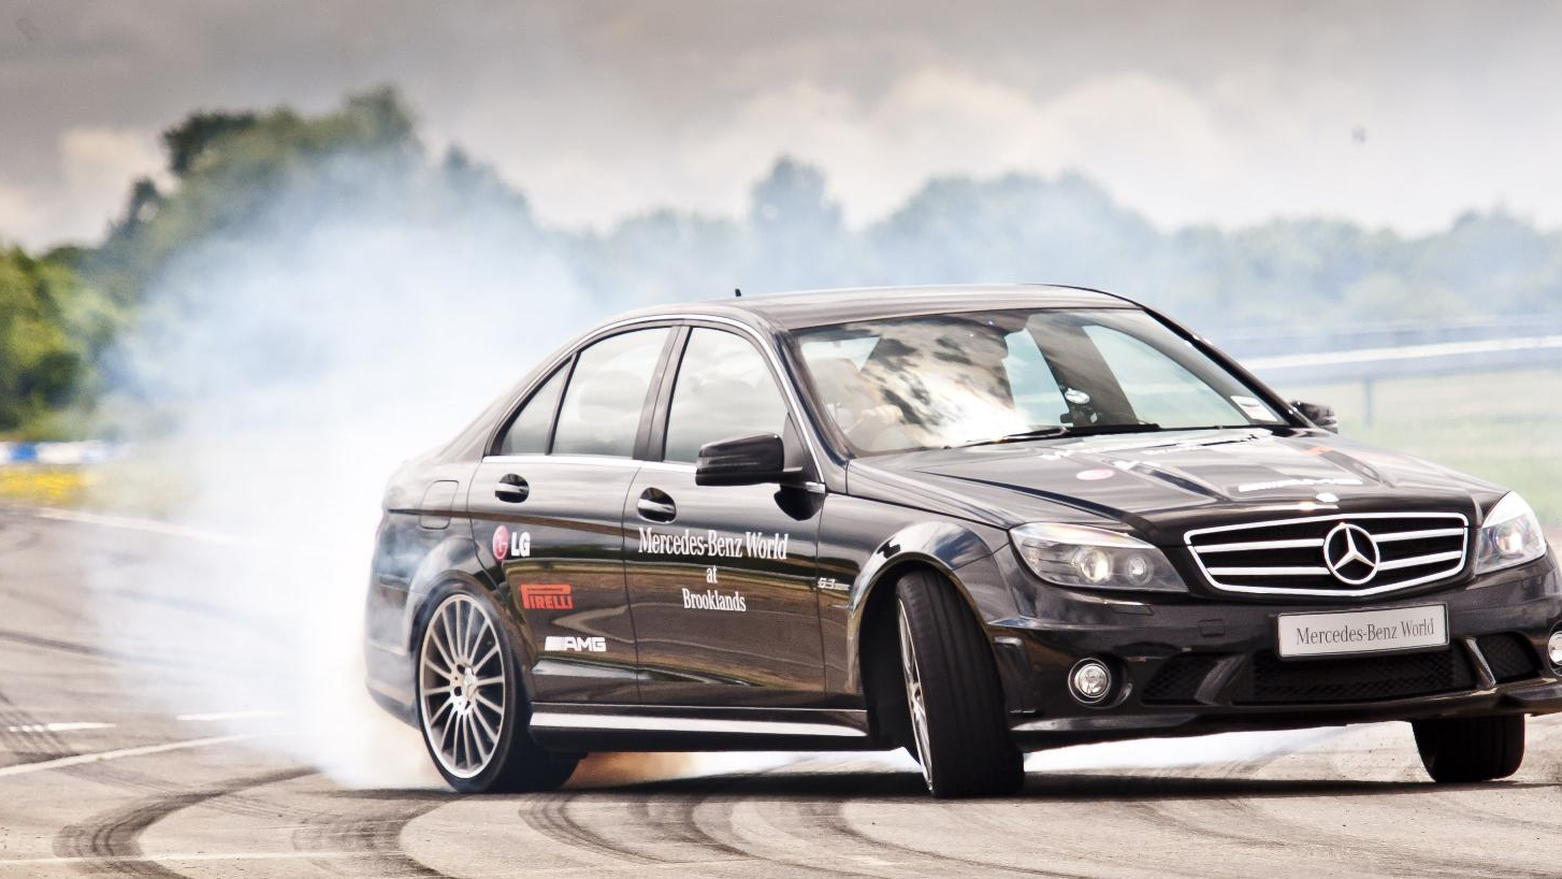 Mauro Calo sets world record drift in Mercedes-Benz